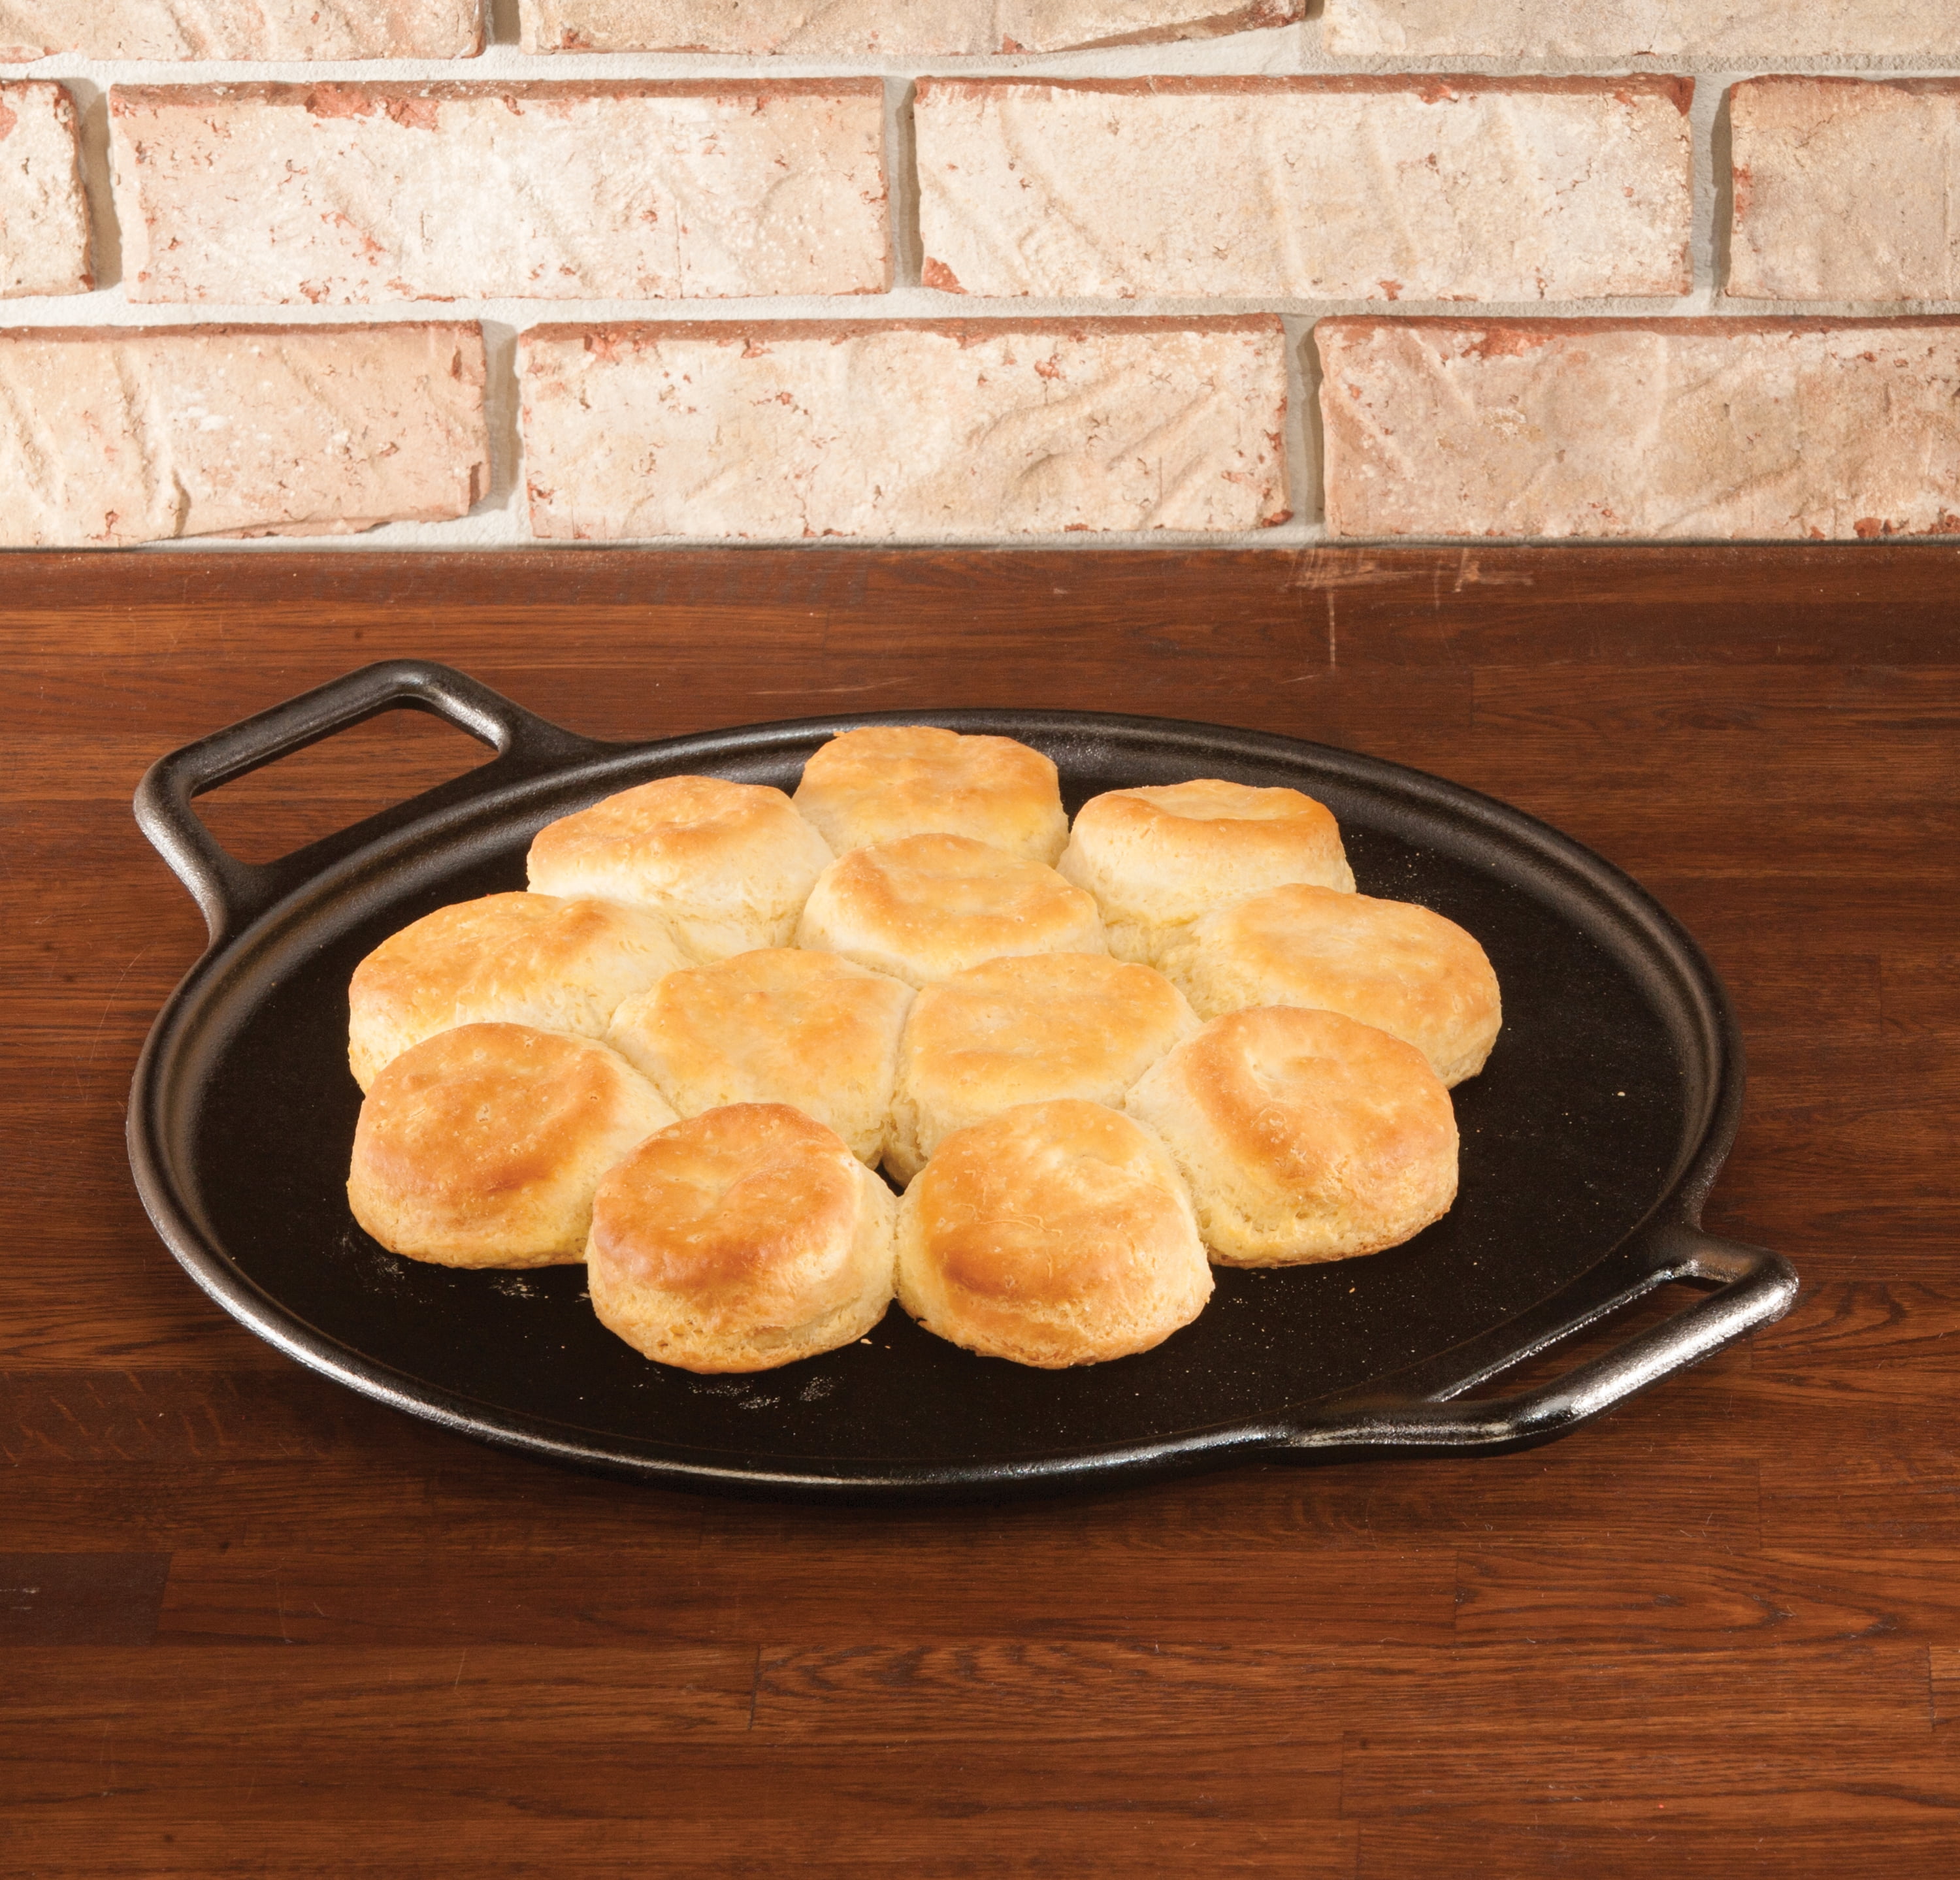  Lodge 13-1/4 Inch Cast Iron Pre-Seasoned Skillet – Signature  Teardrop Handle - Use in the Oven, on the Stove, on the Grill, or Over a  Campfire, Black: Lodge Cast Iron: Home